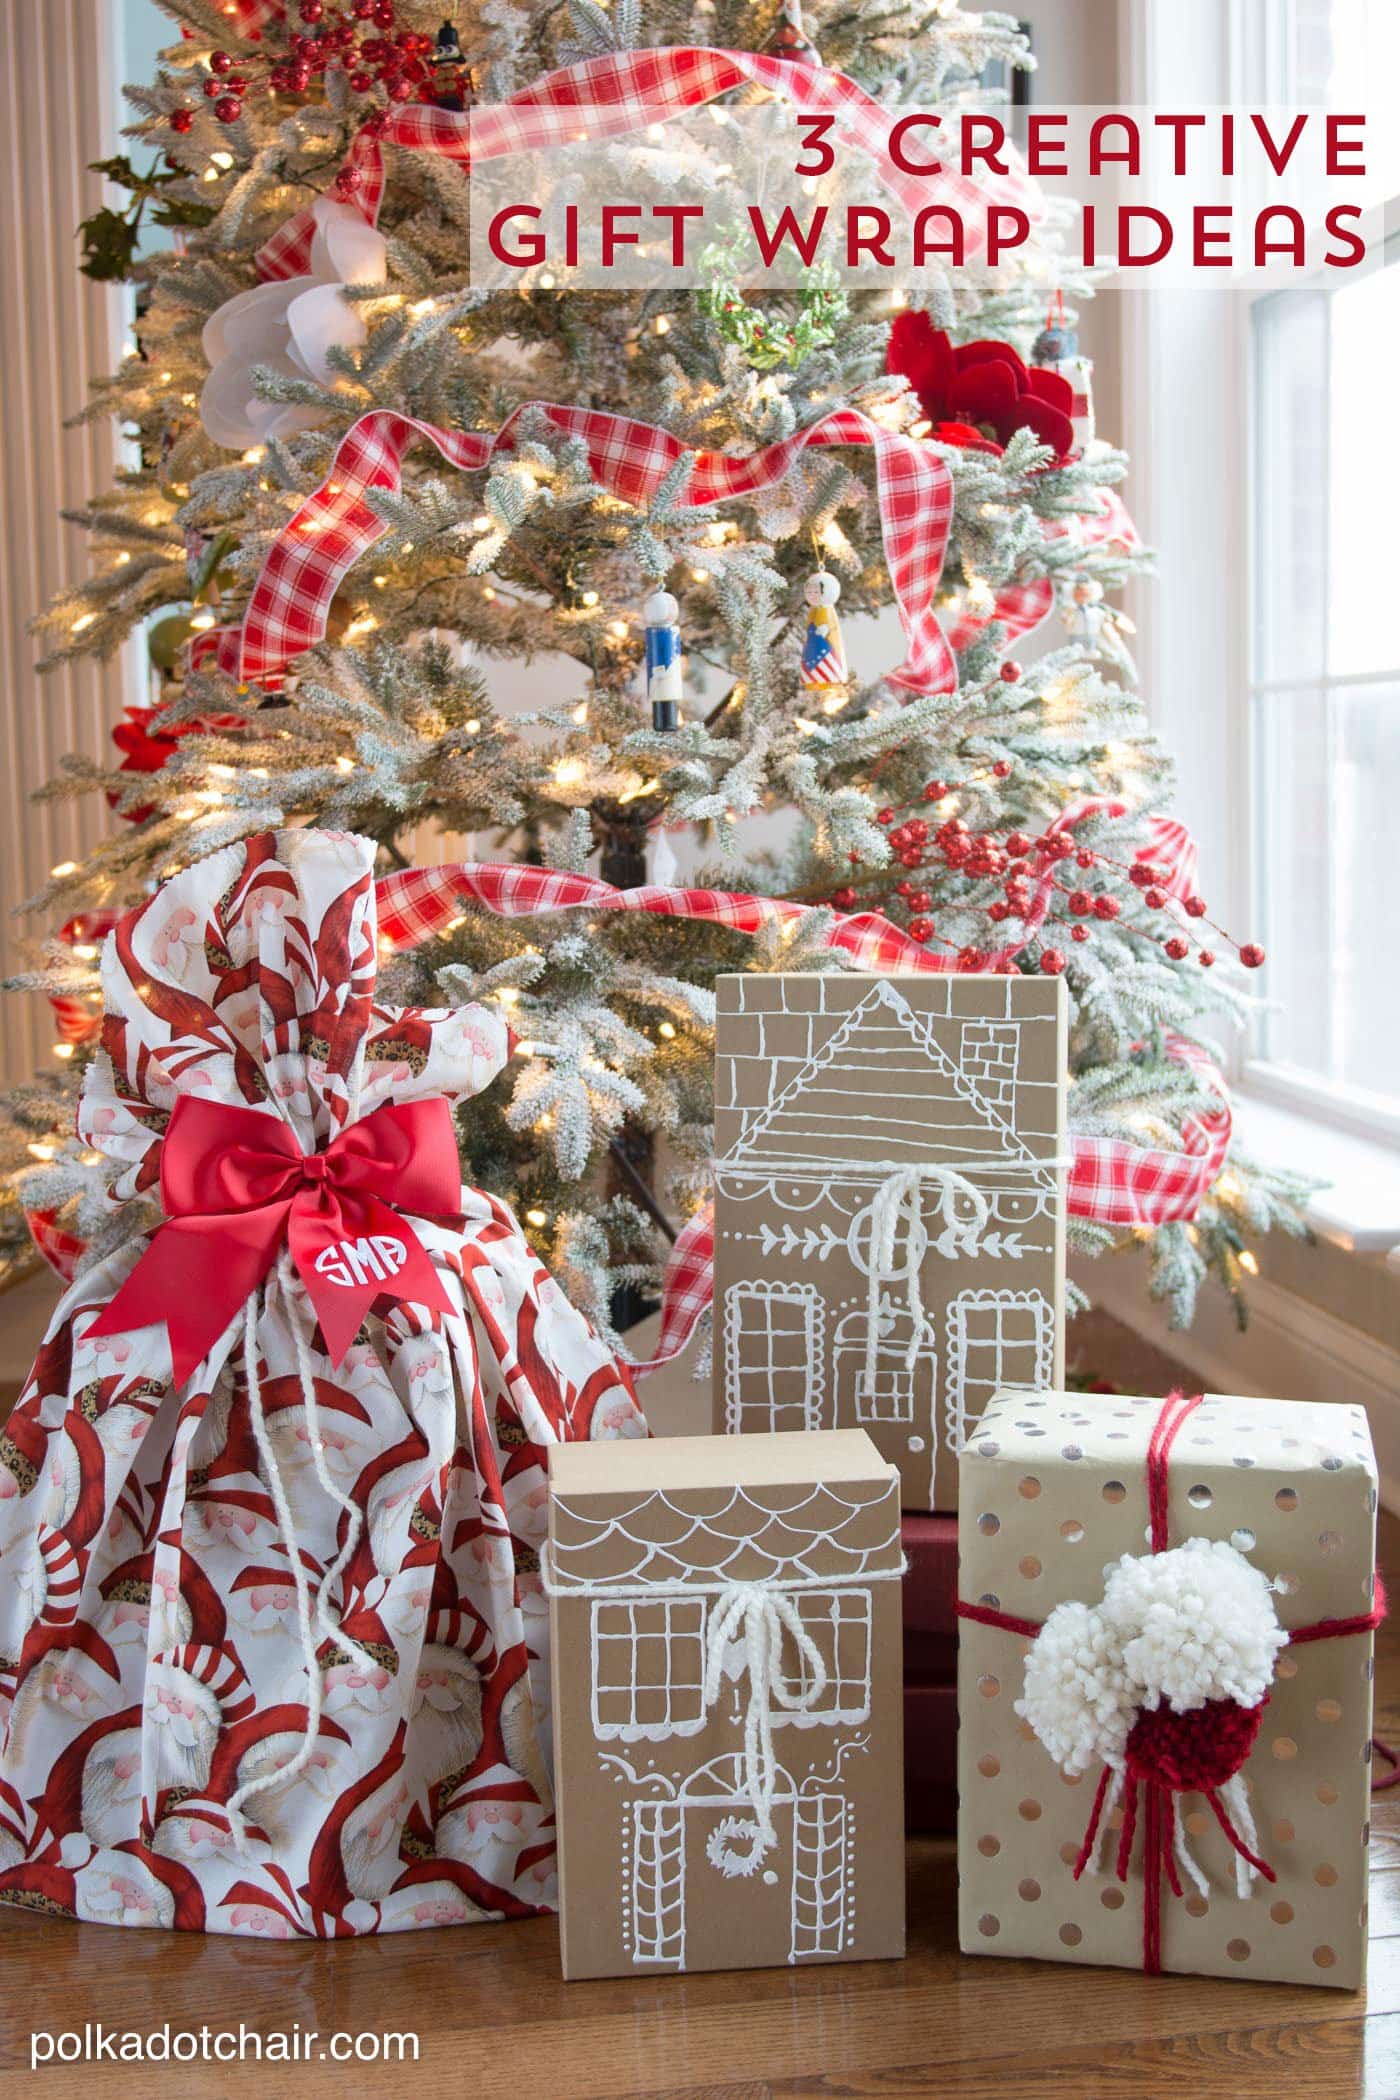 Simple and Festive Gift Wrapping Ideas